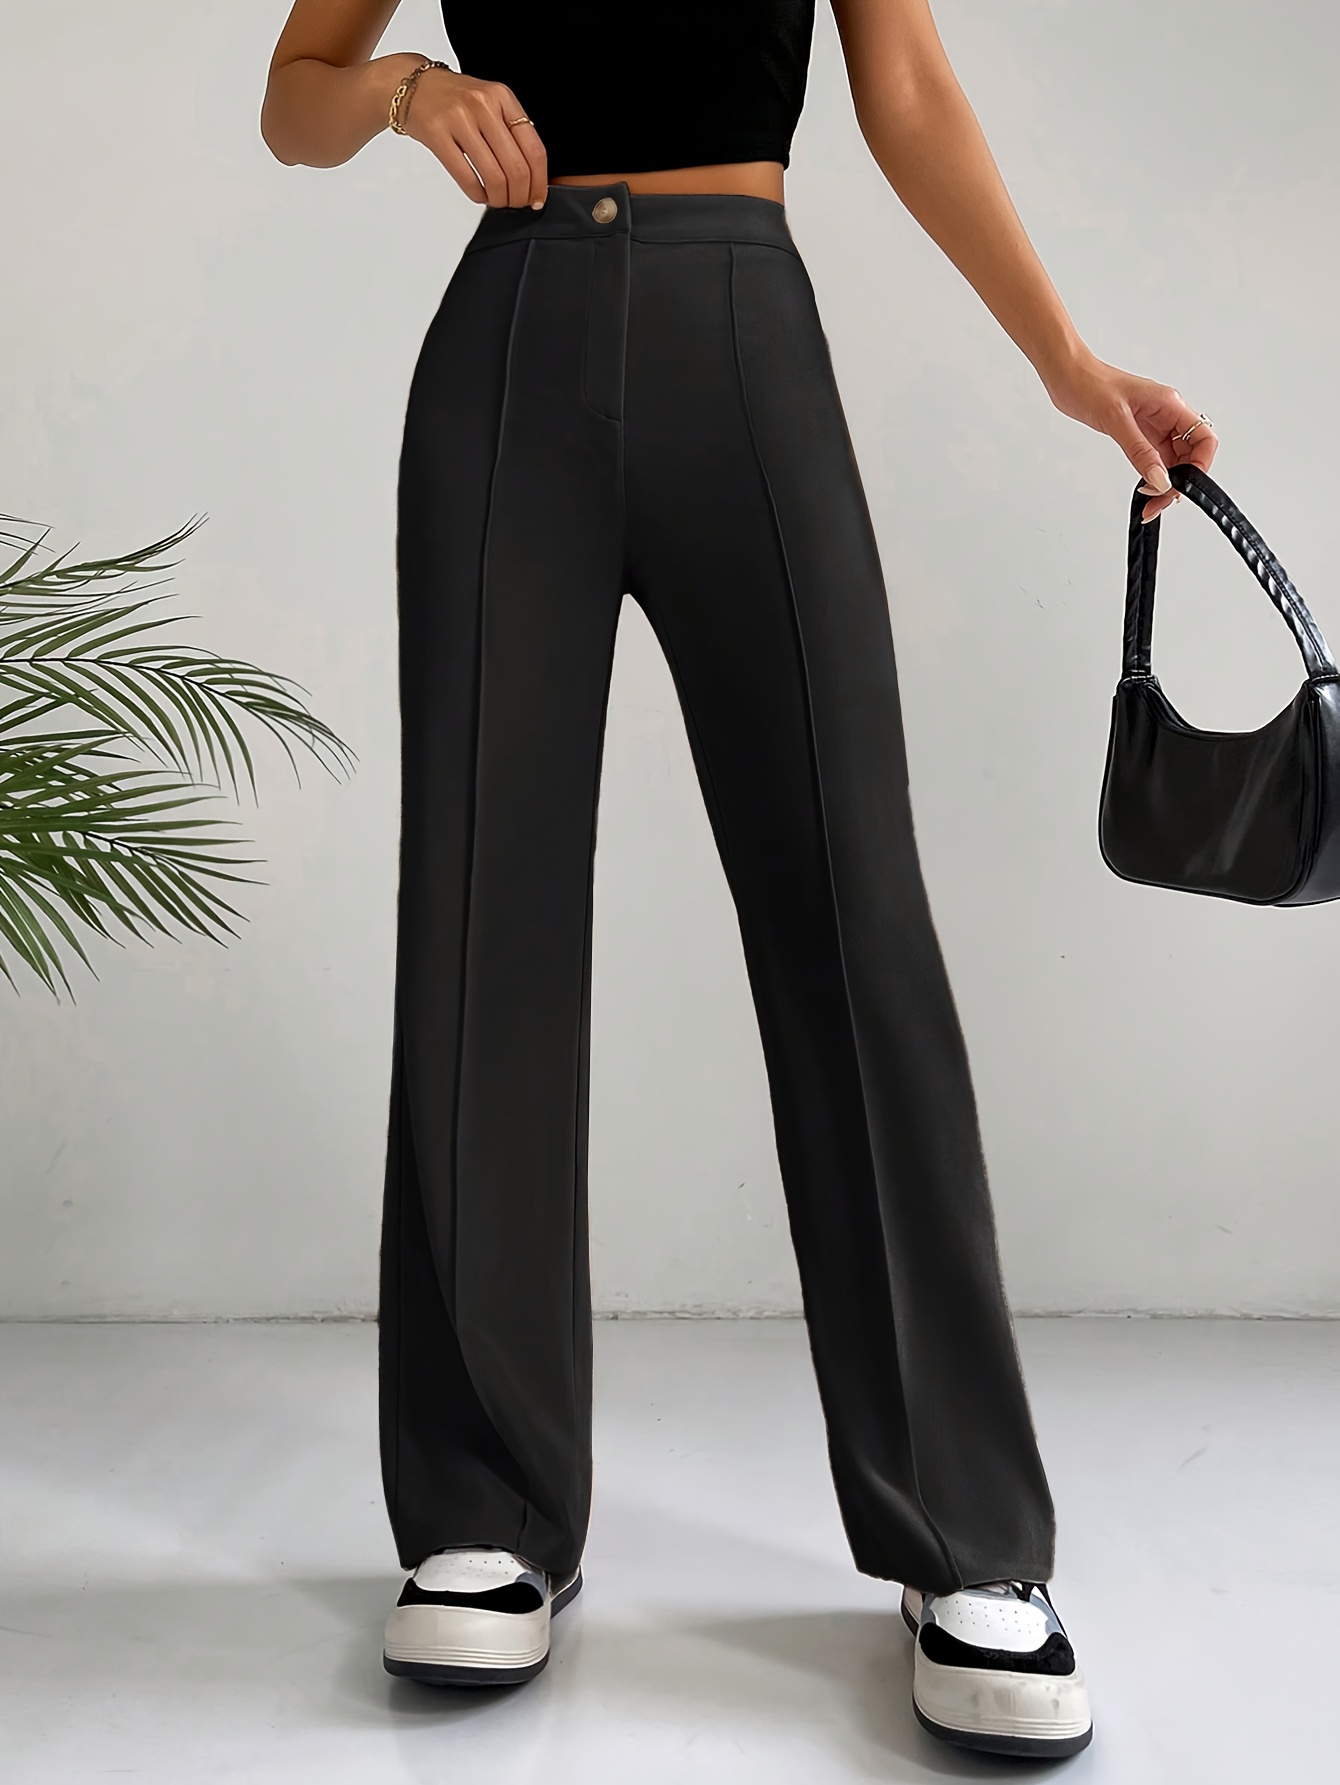 Women's BLACK/WHITE Striped High Waist Straight Trousers/vintage 70s  Fashion /wide Legs Loose Pants. 